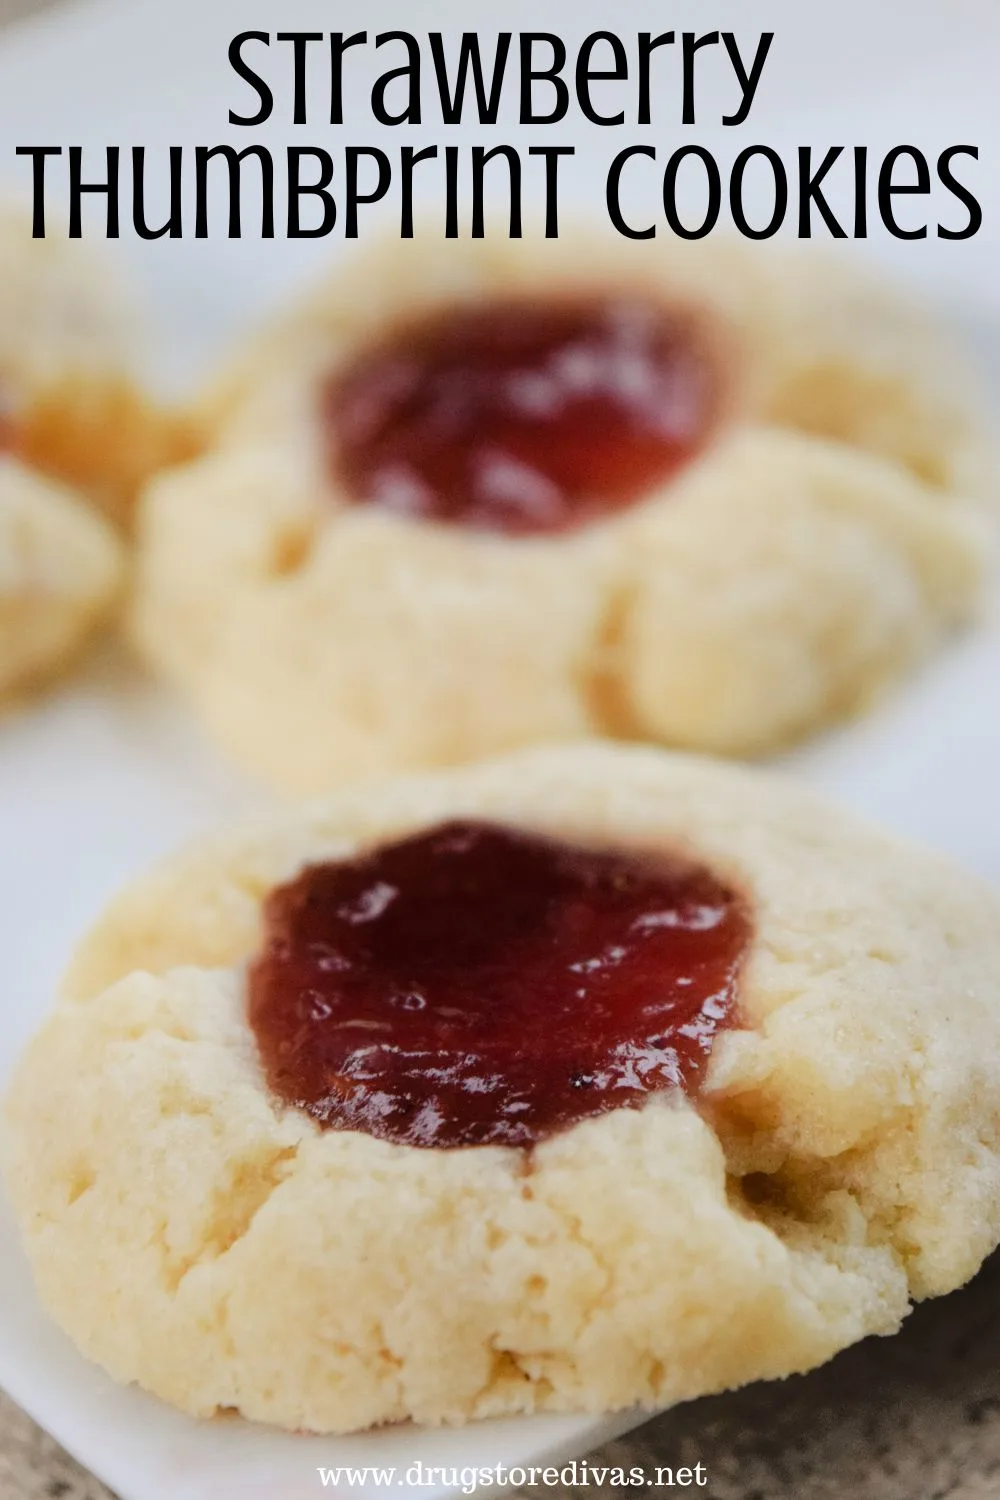 Two thumbprint cookies with red jelly in the center with the words 